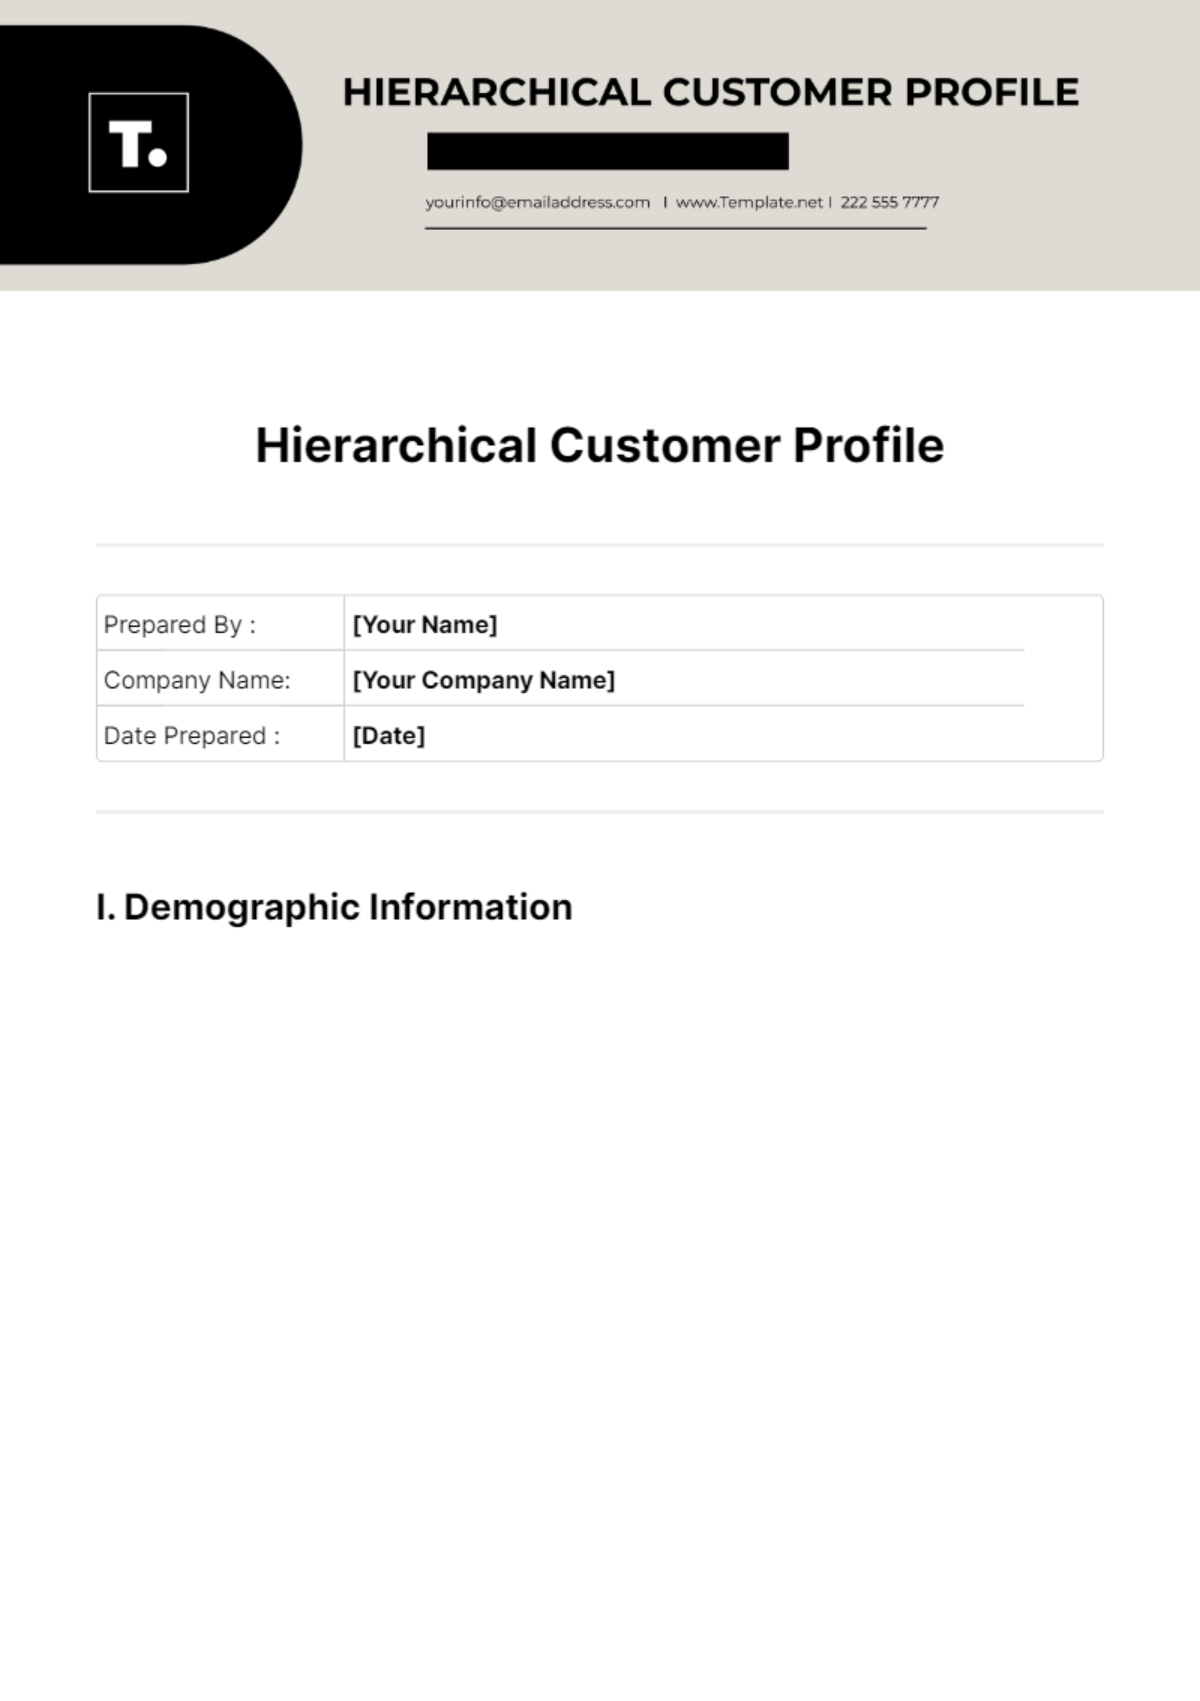 Hierarchical Customer Profile Template